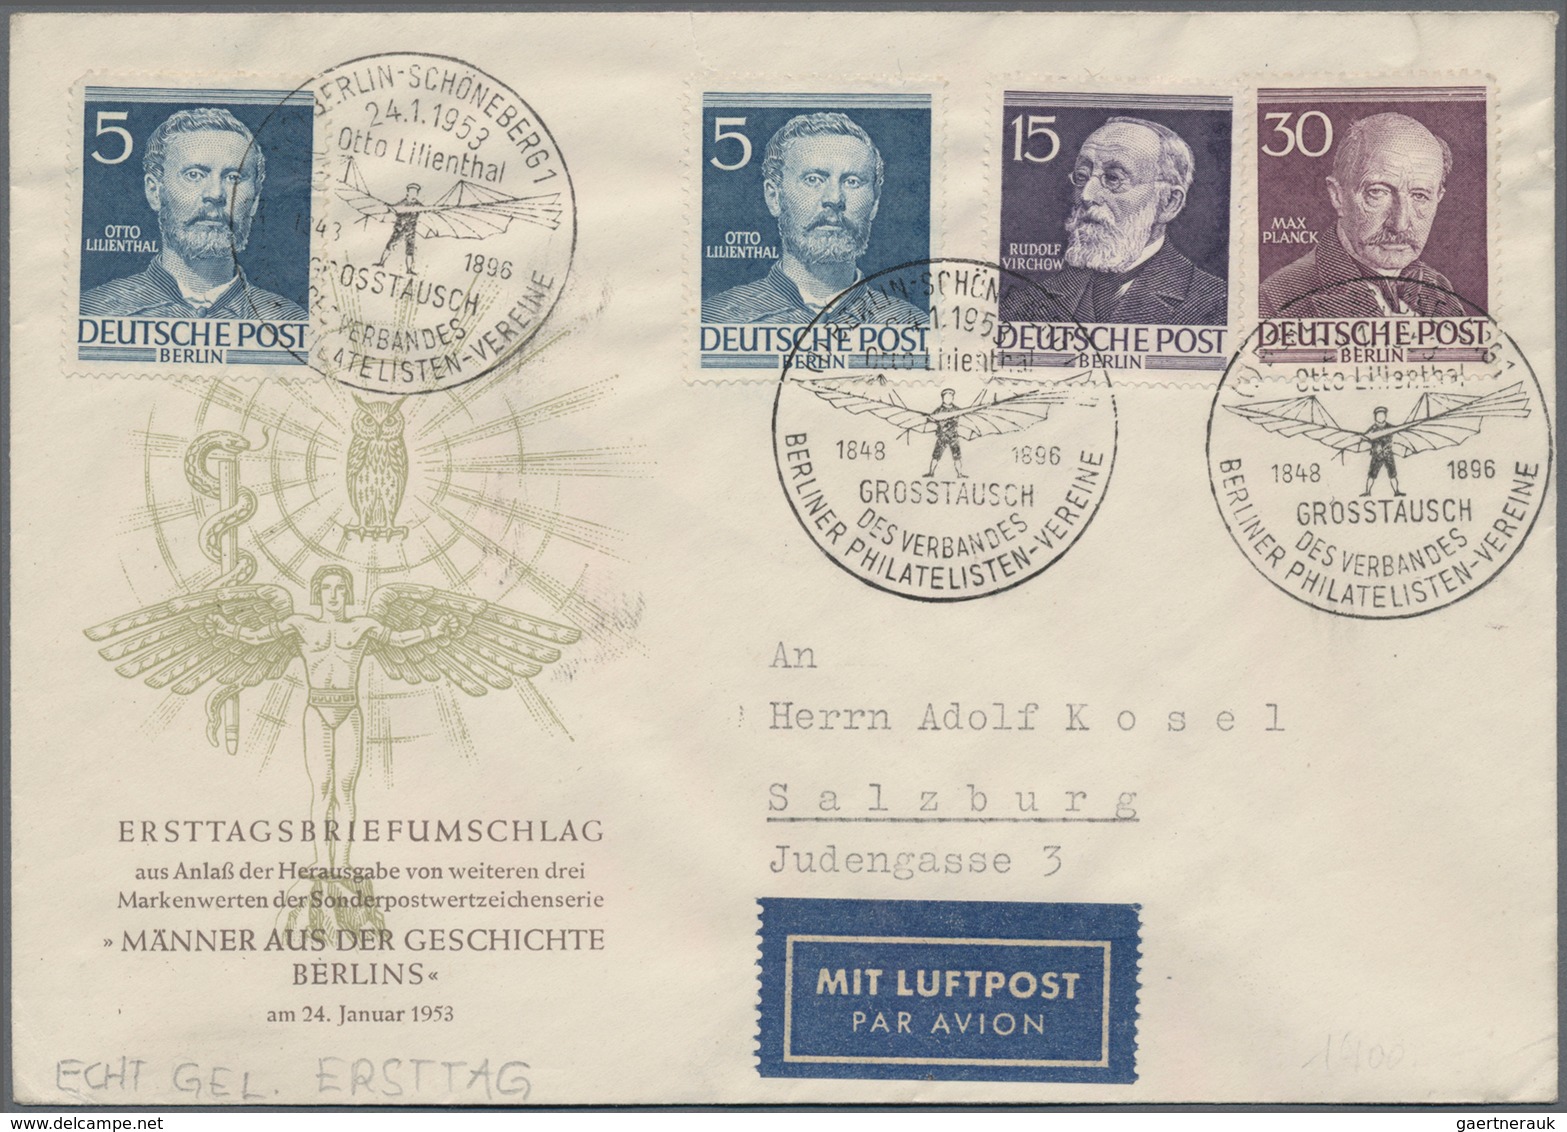 Flugpost Europa: 1932/1972, lot of apprx. 94 flight covers/cards, incl. first and special flights, h